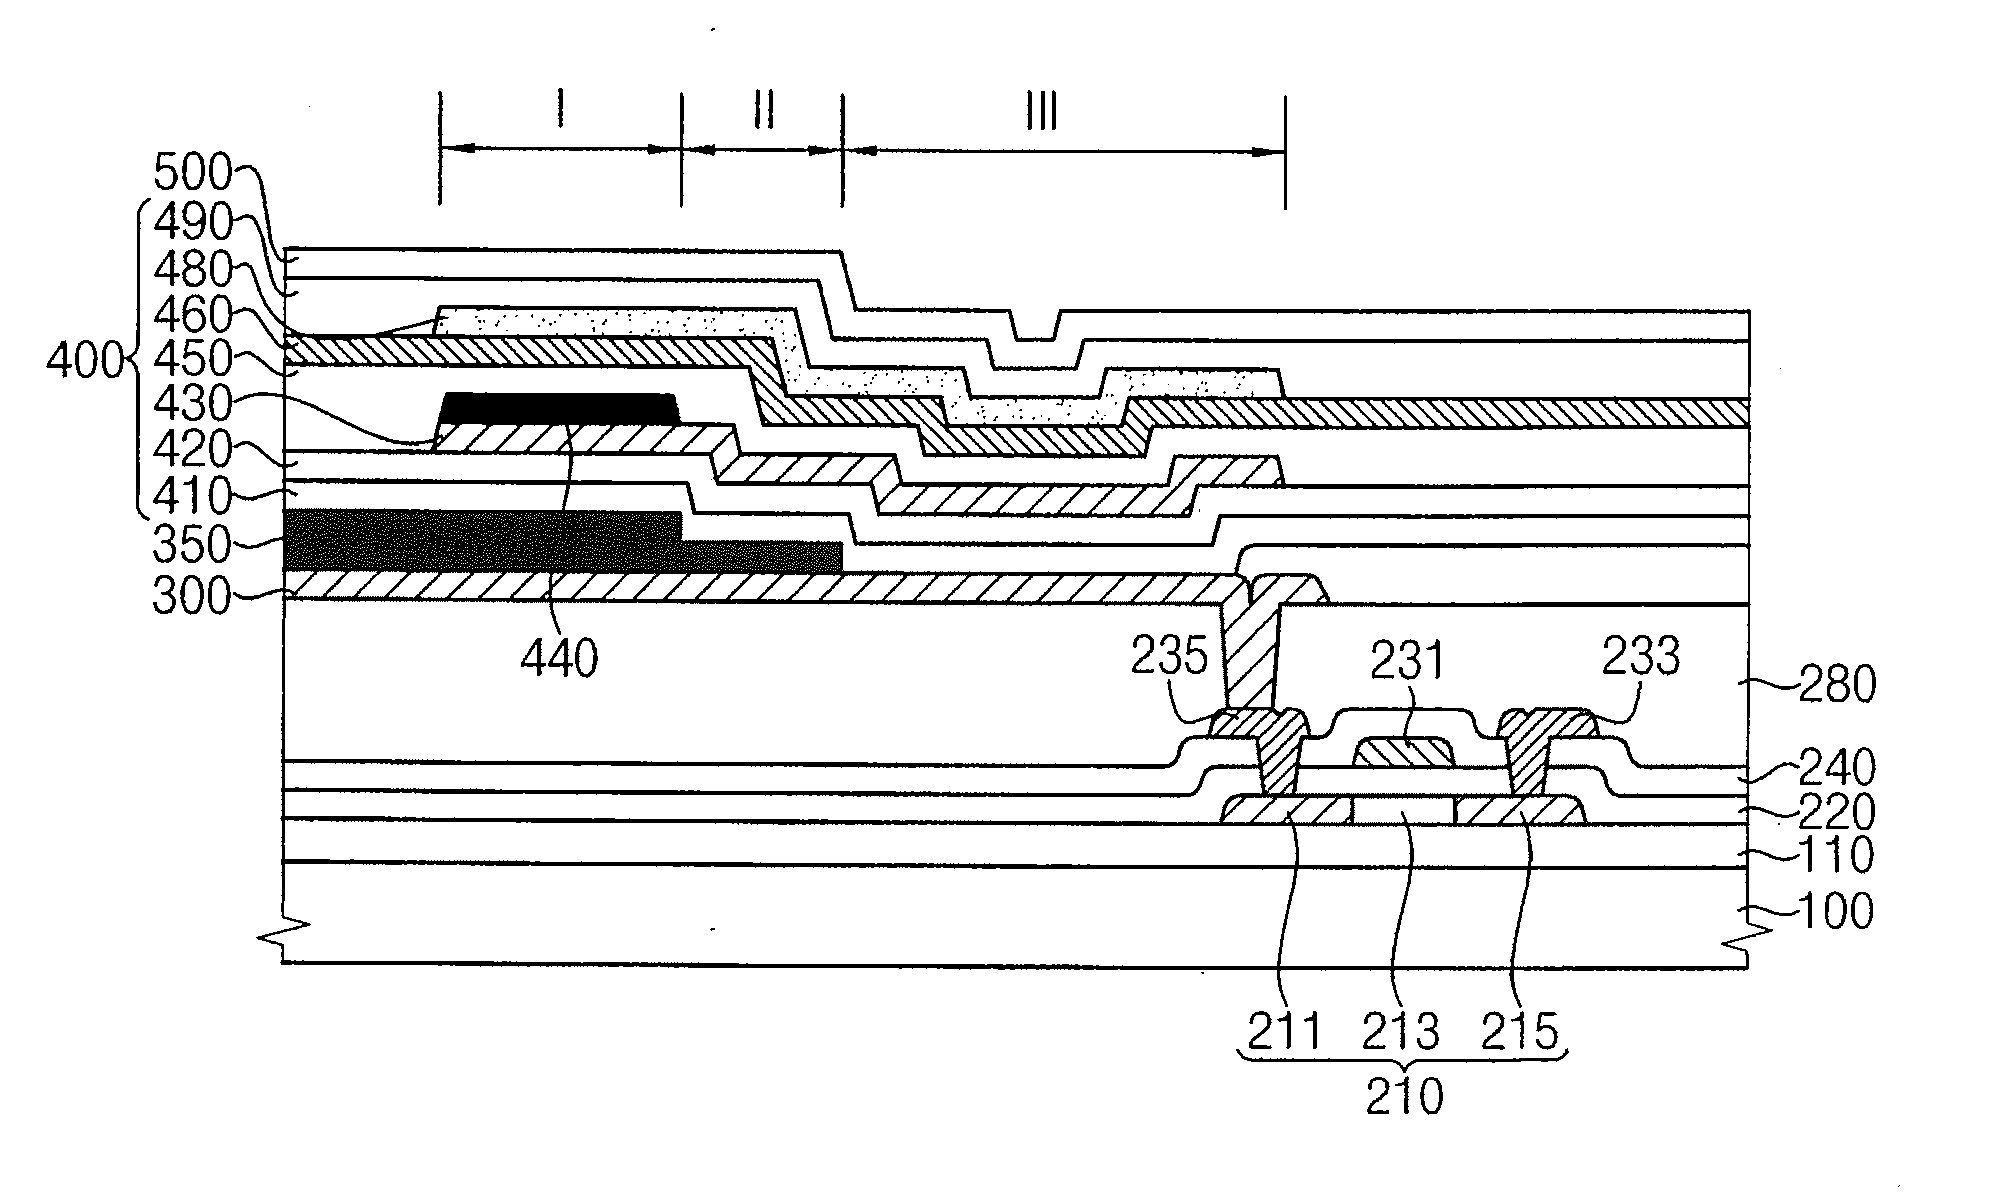 Light Emitting Structure, Display Device Including a Light Emitting Structure and Method of Manufacturing a Display Device Including a Light Emitting Structure